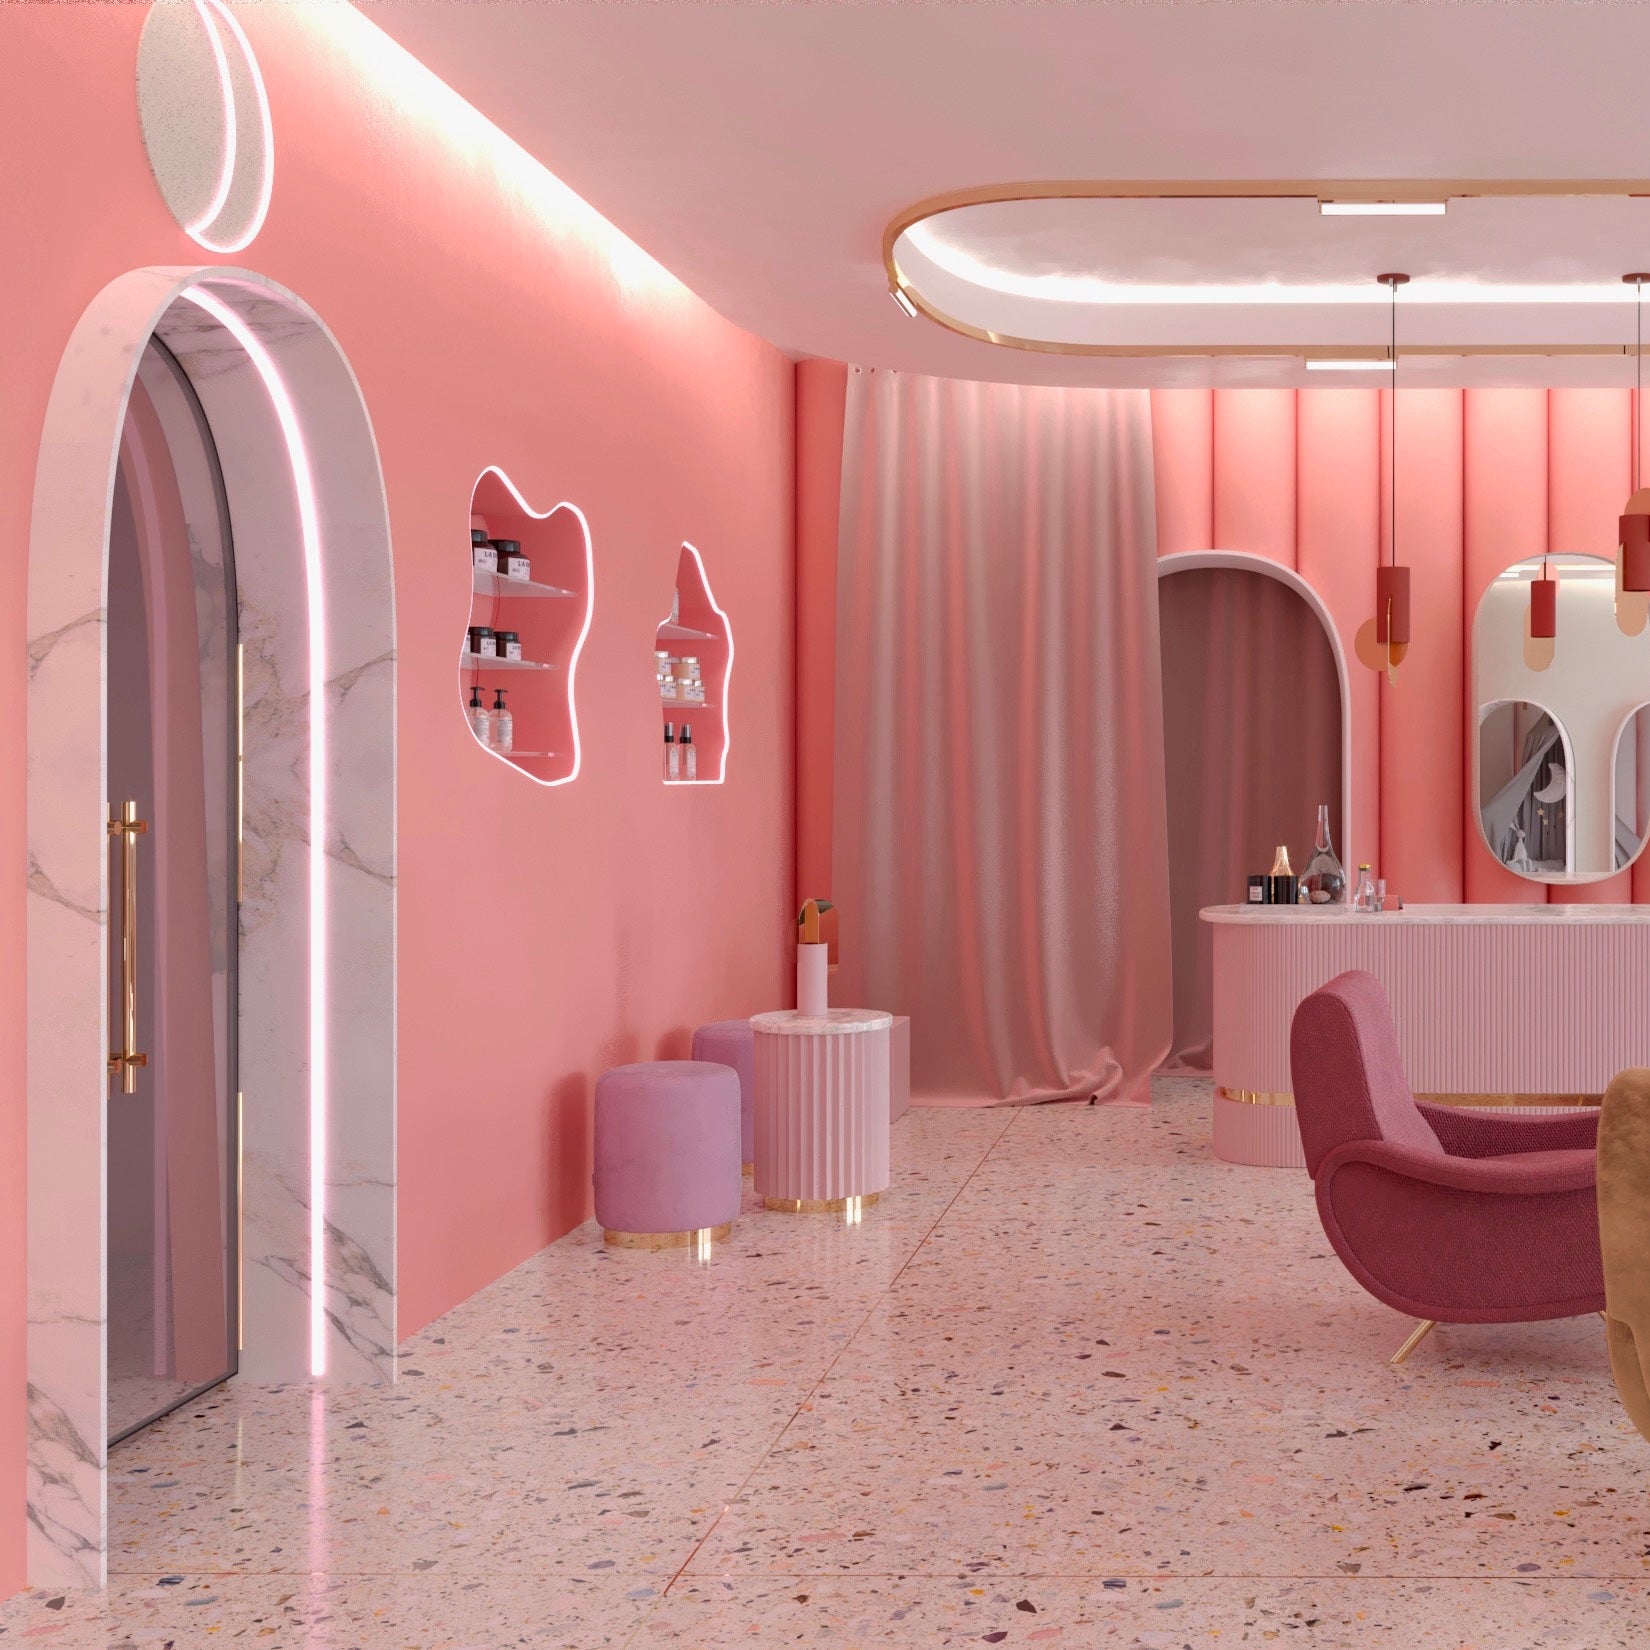 Pink Moon wellcare space - UWS